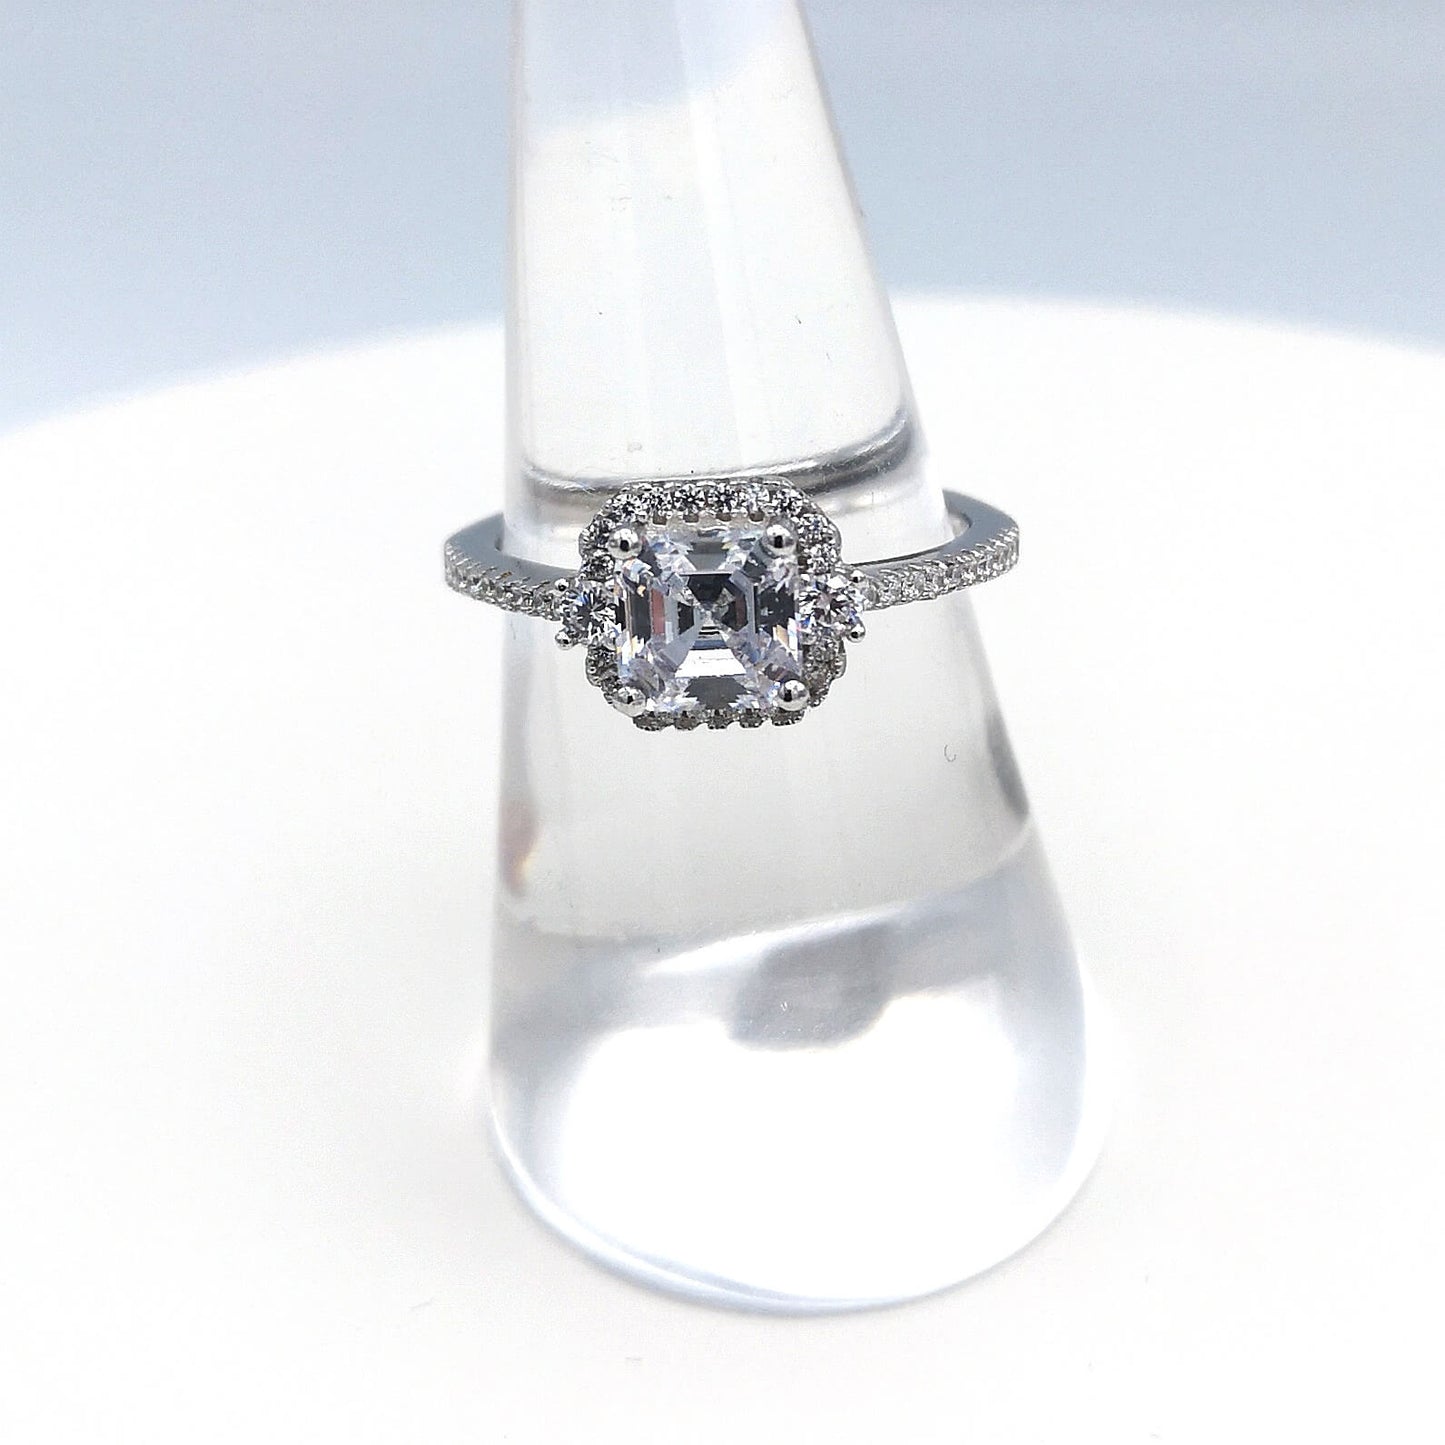 Sterling Silver 3 Stone Asscher Cut CZ Halo Ring